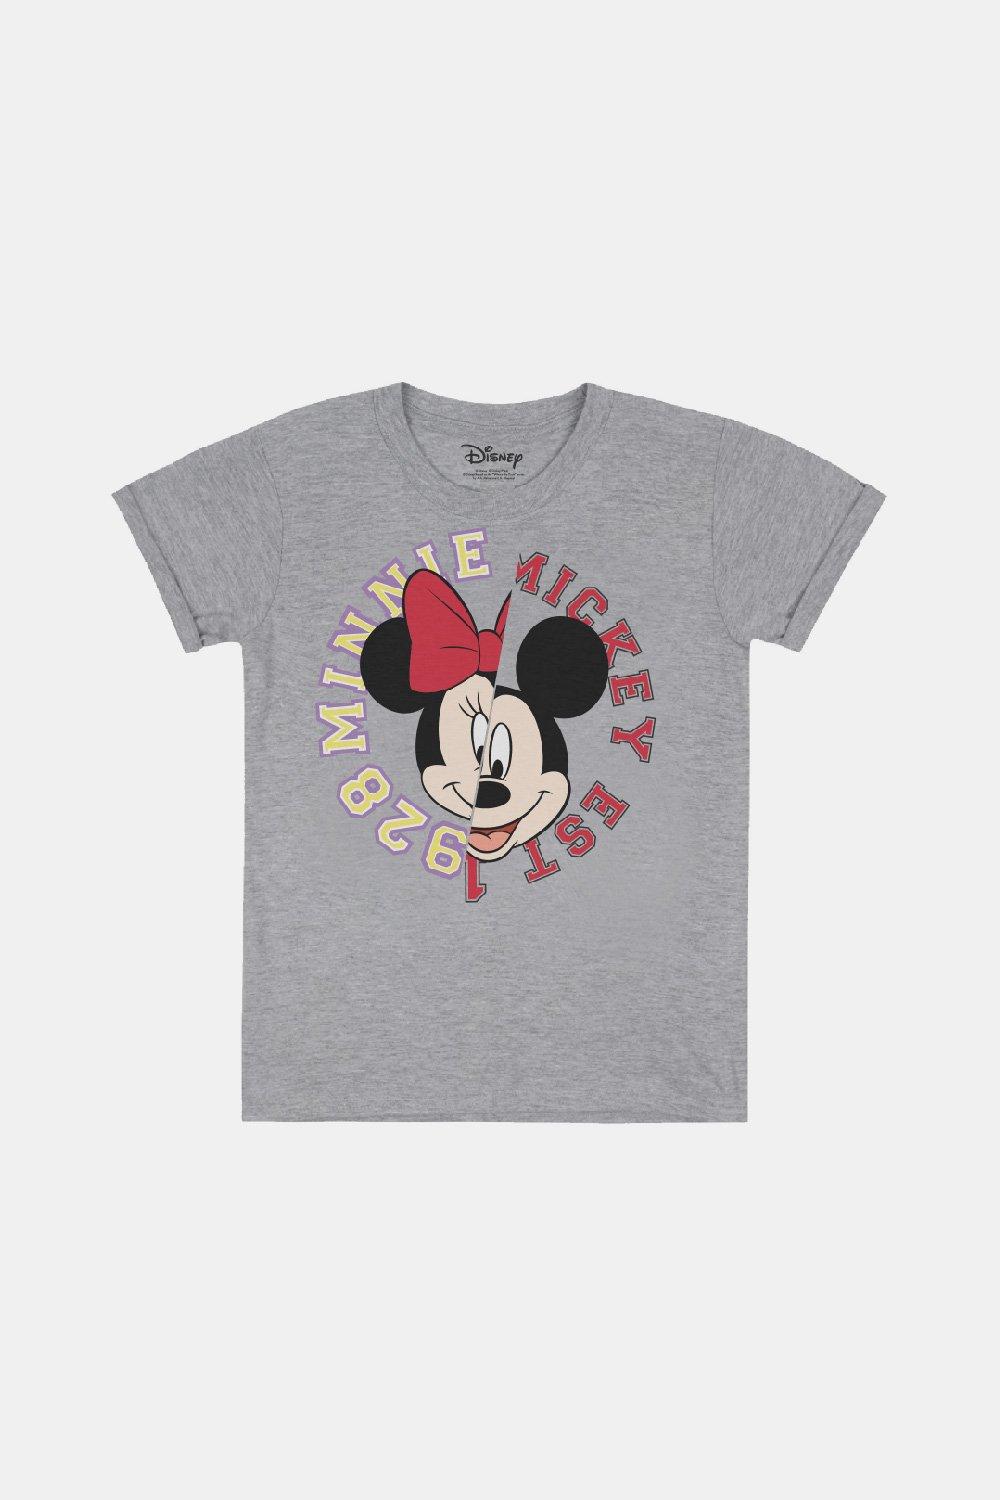 Mickey & Minnie Mouse Collegiate Girls T-Shirt